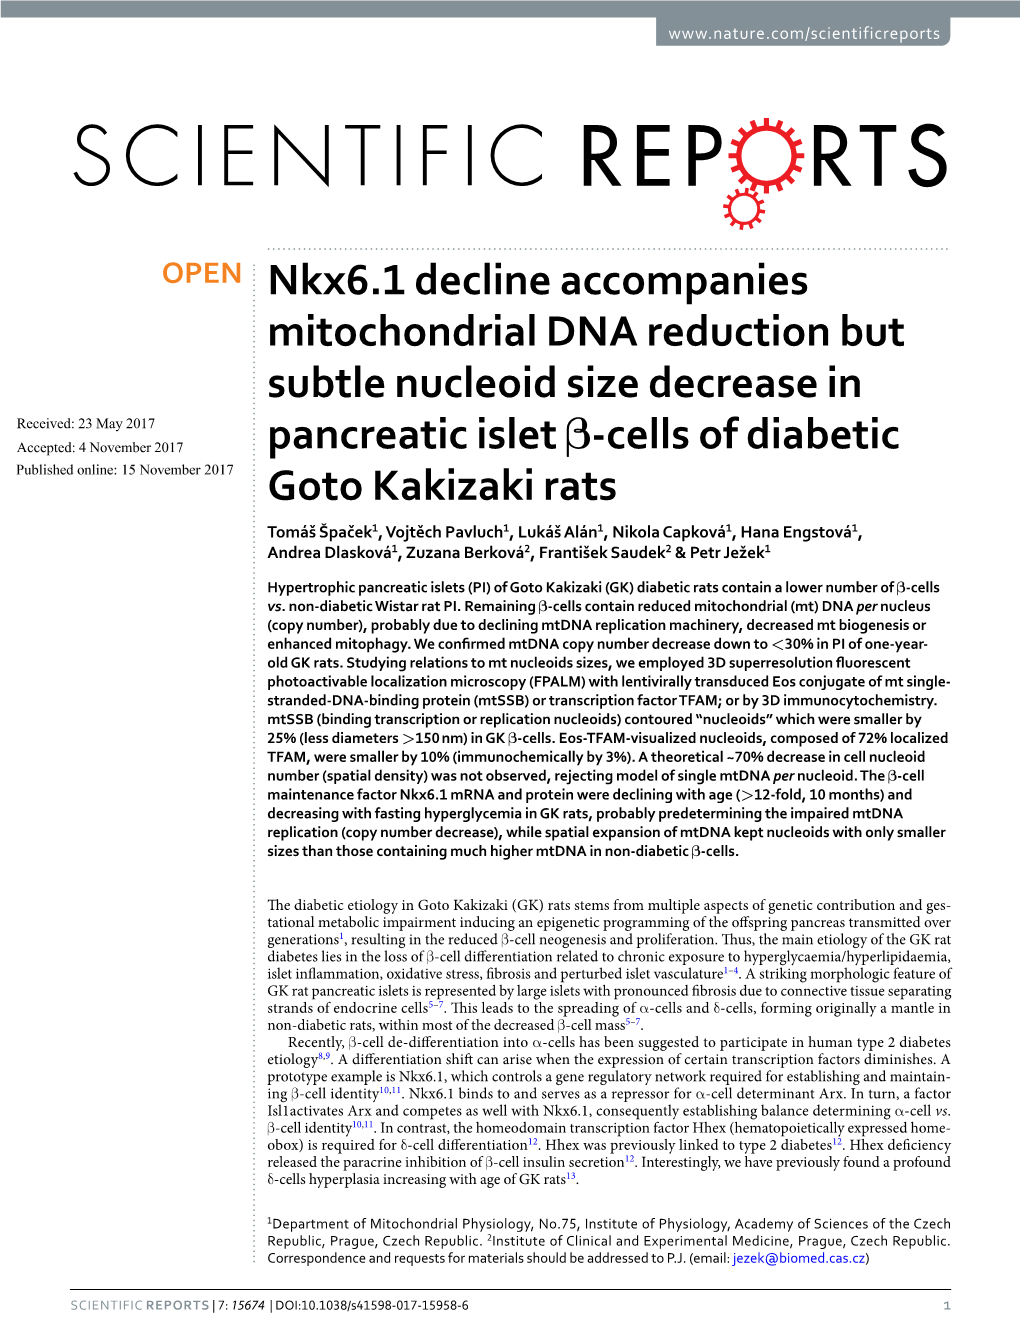 Nkx6.1 Decline Accompanies Mitochondrial DNA Reduction But